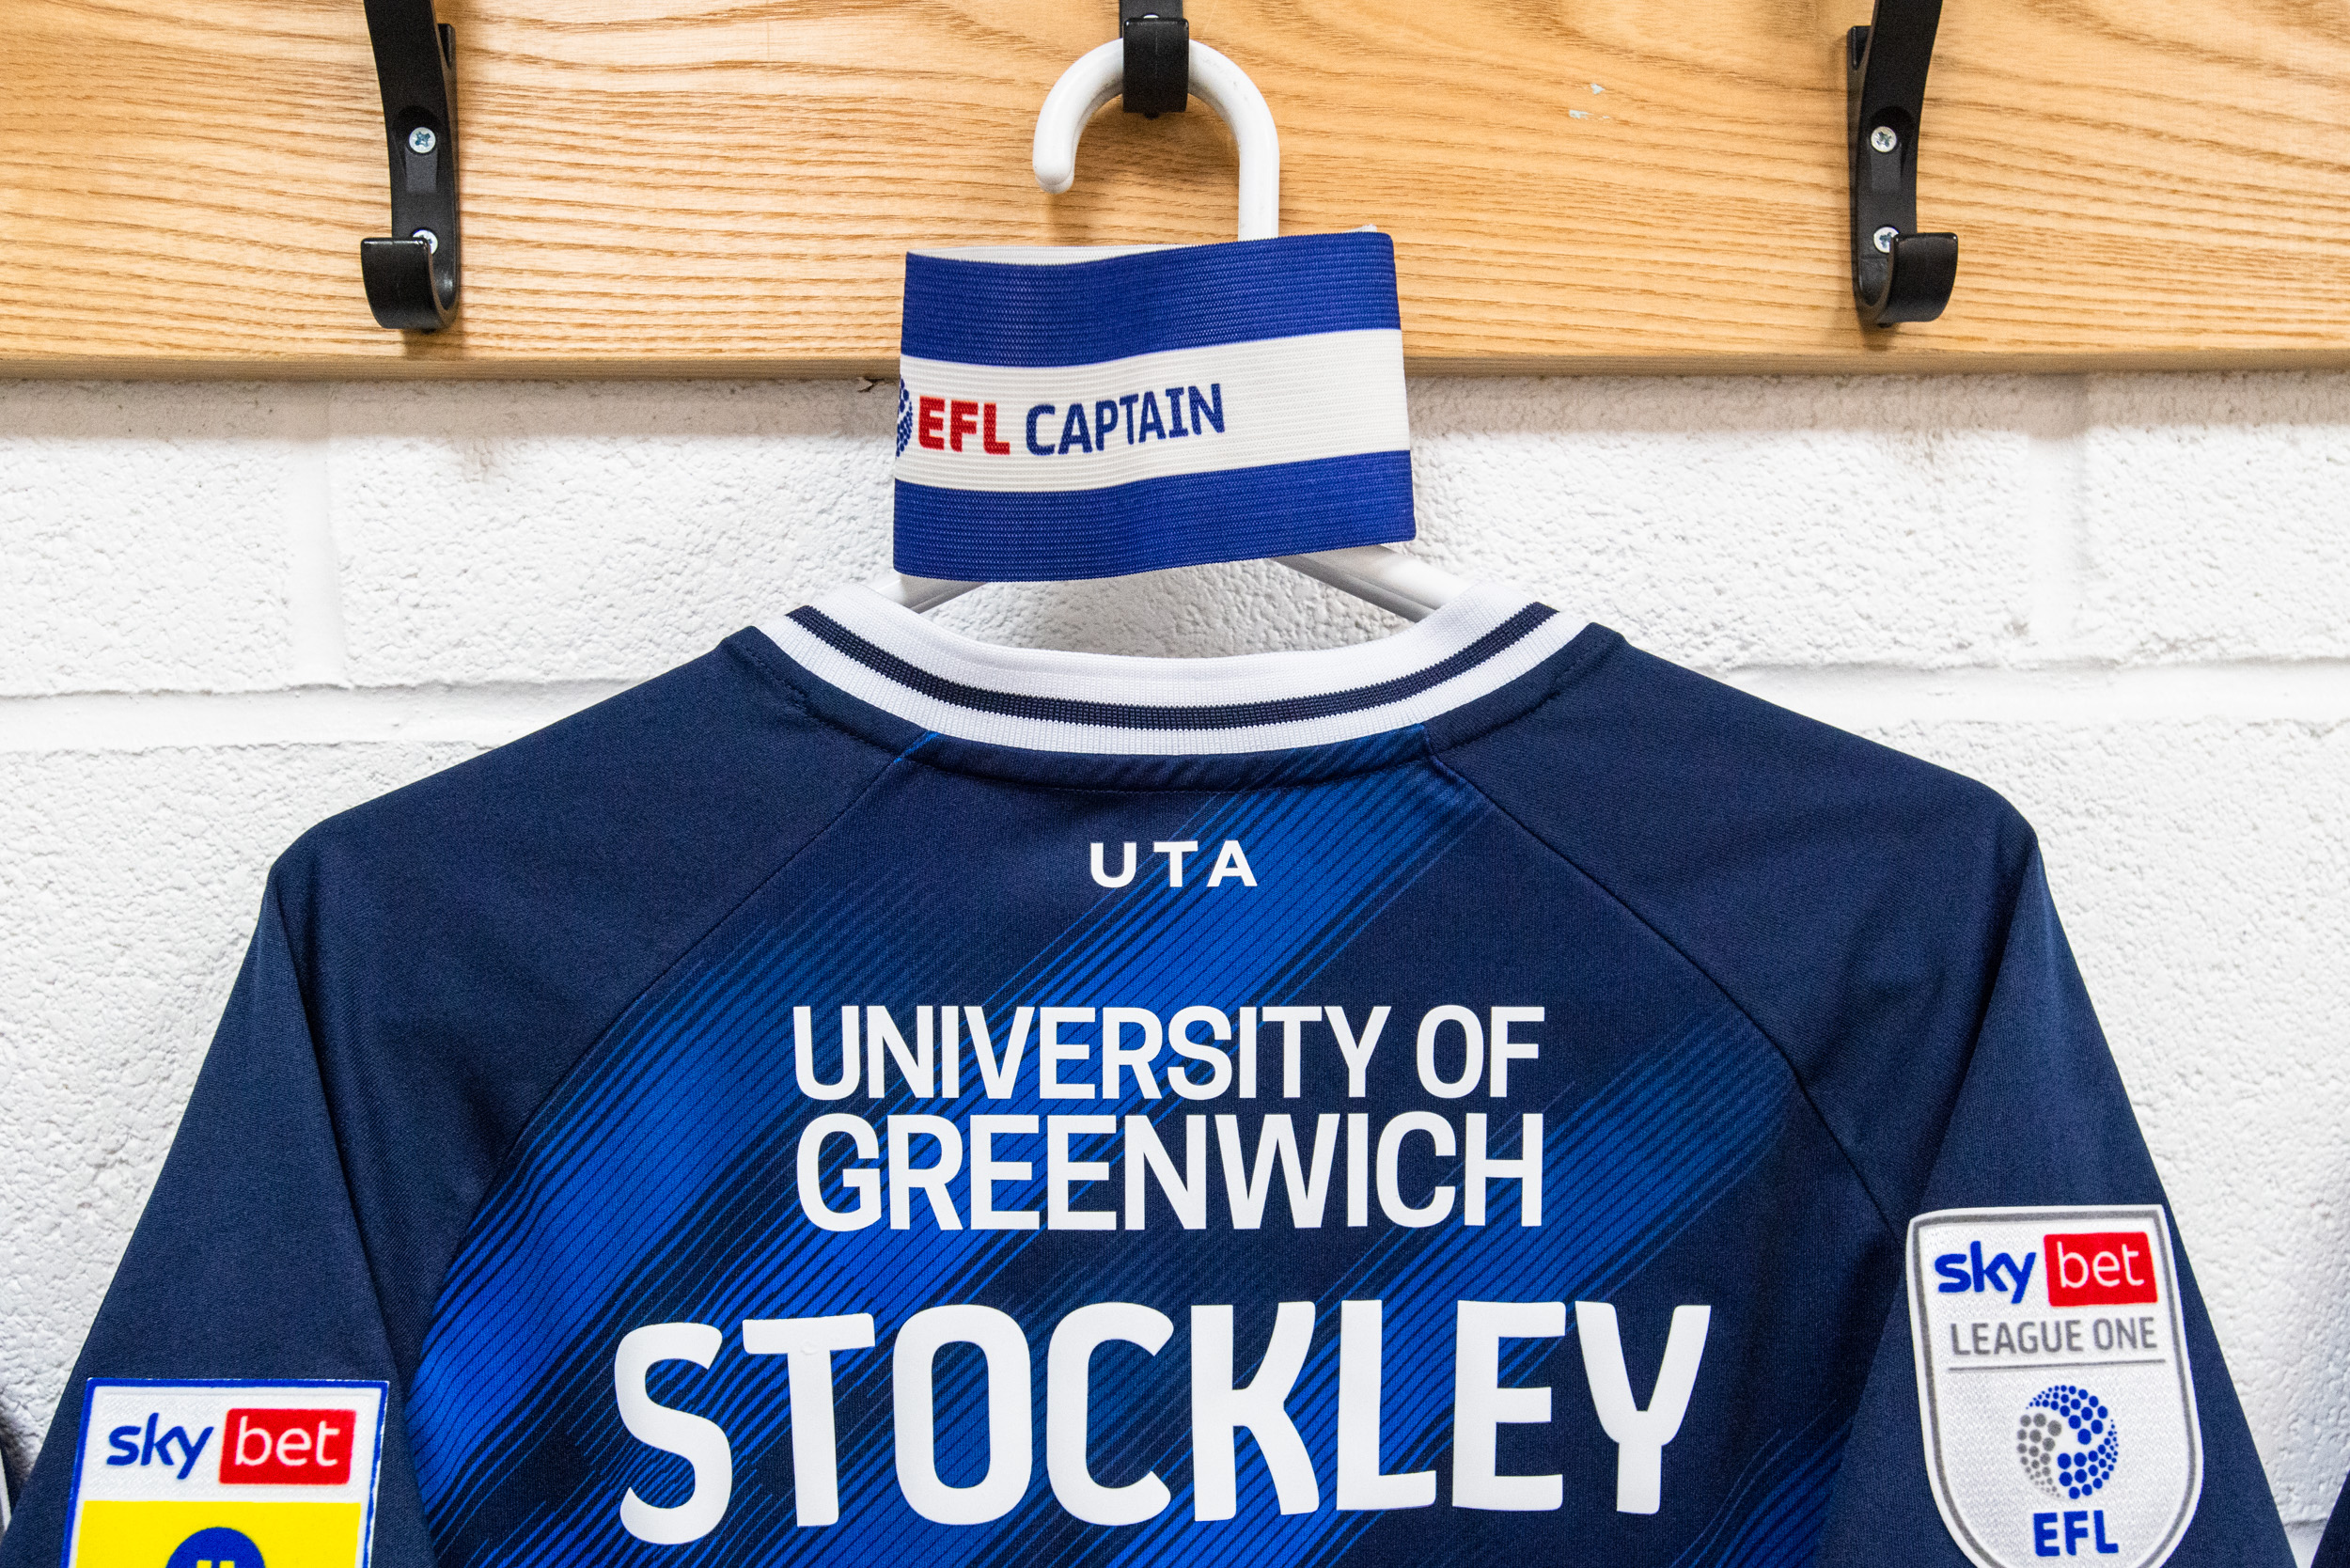 Stockley shirt and captain's armband